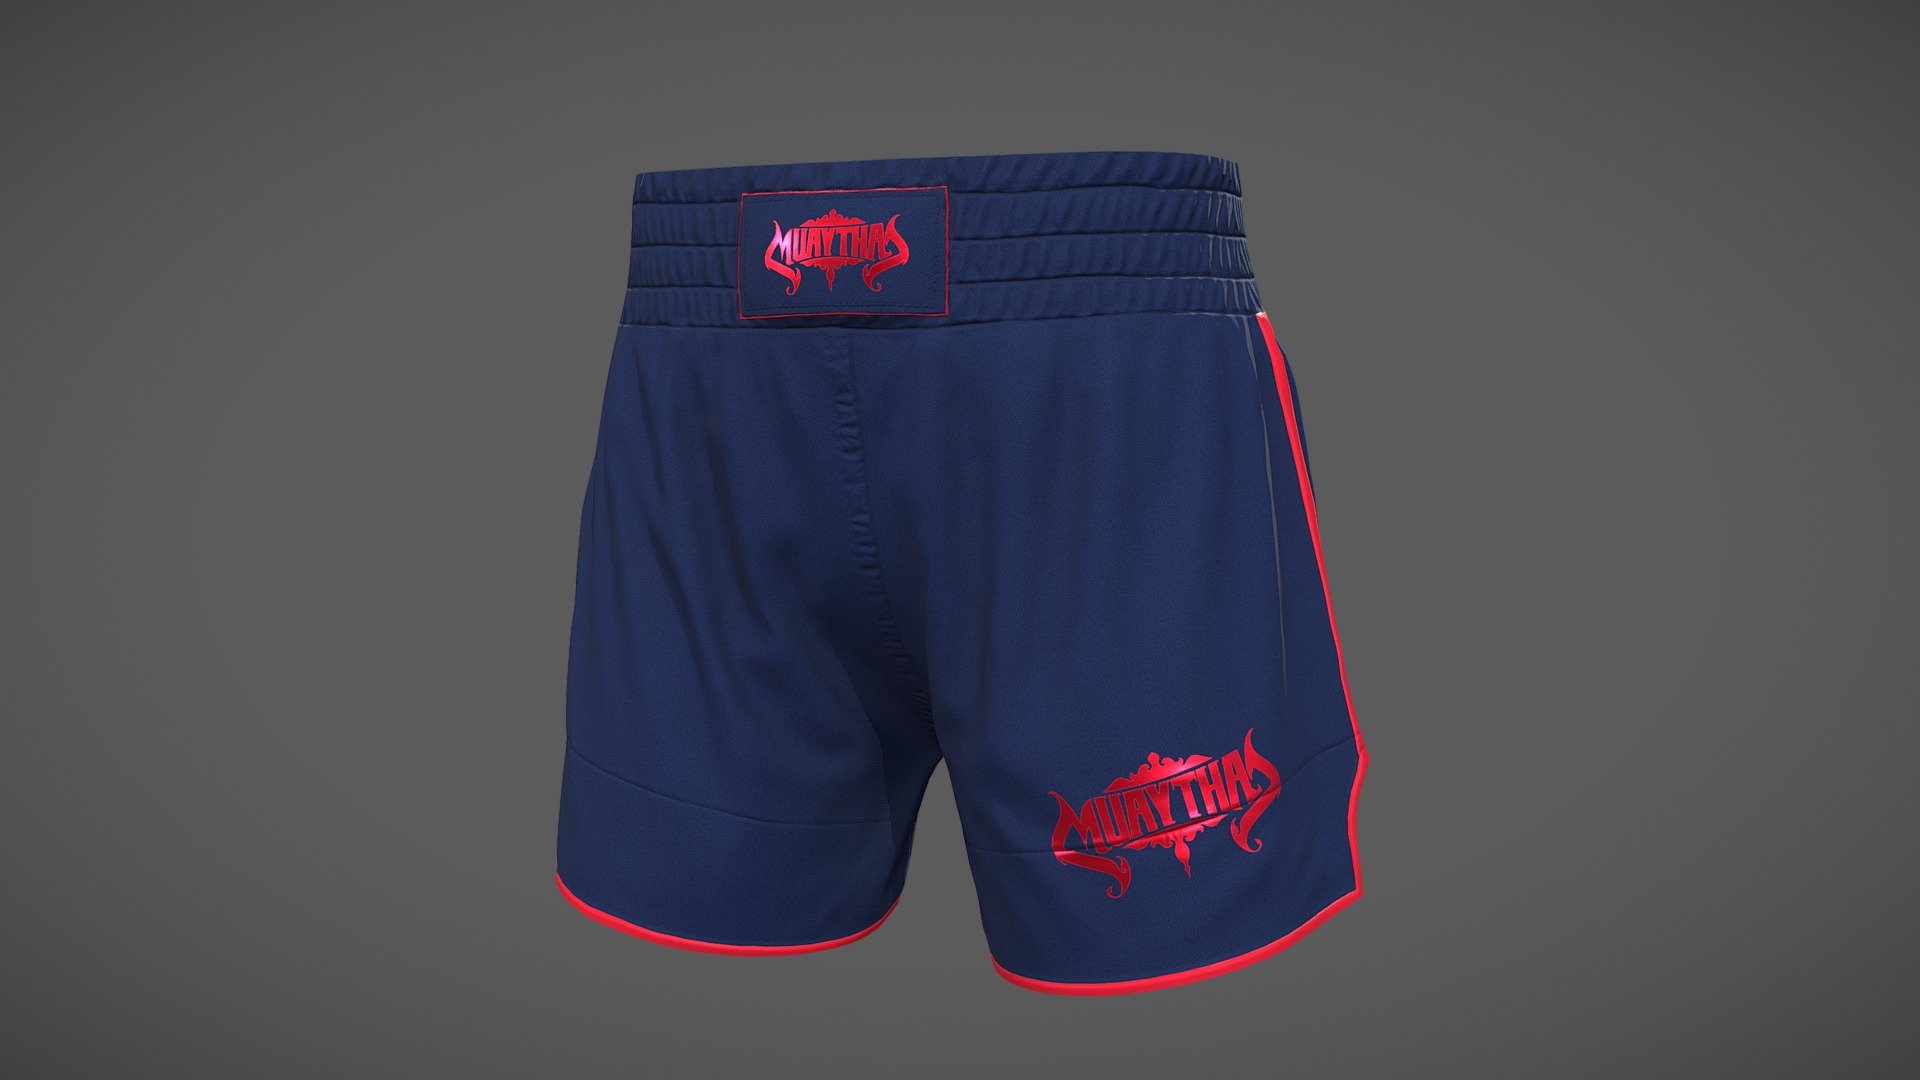 MMA Shorts - boxing shorts

This is a Lowpoly PBR model ready for use in AR, VR, Realtime Visualizations, Games with 4K Textures.

Features: Low-poly game ready PBR Model, Real-World Scale, High-quality 4K Textures 3d model